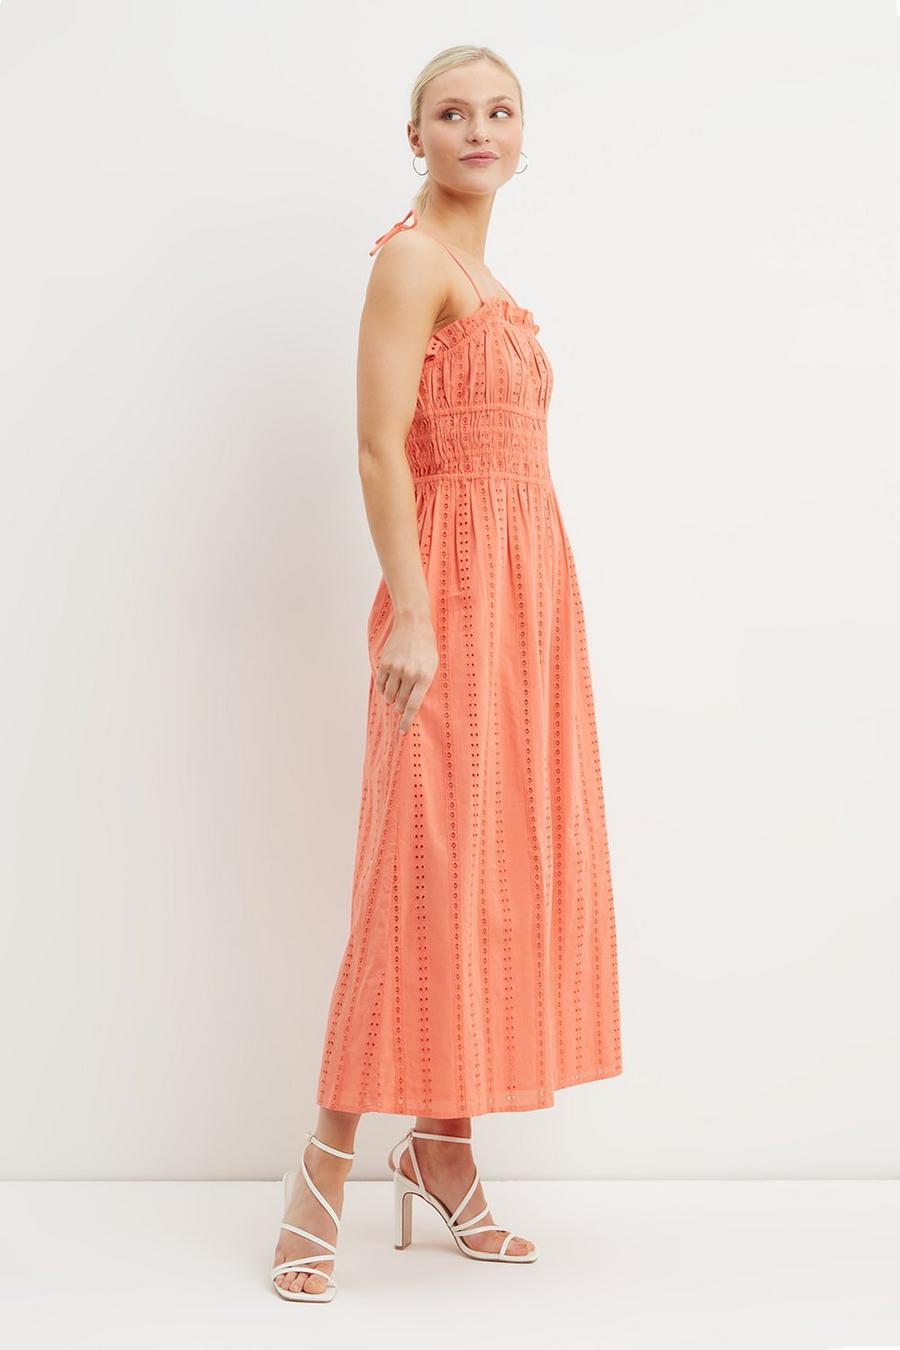 Petite Coral Broderie Ruched Midi Dress